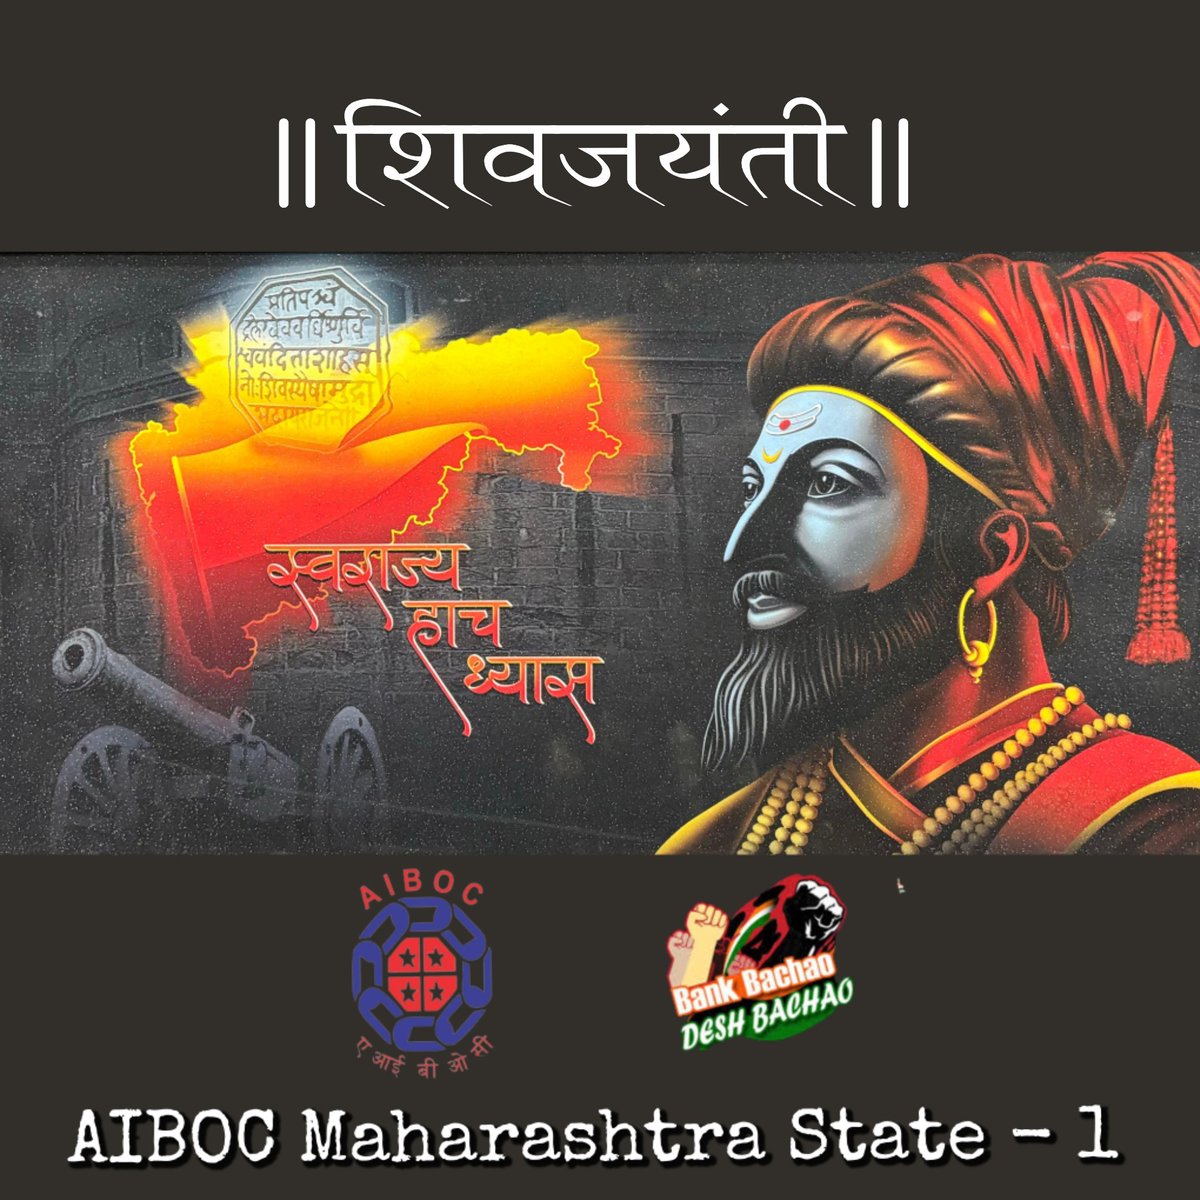 Bowing our head down to the Founder of Hindavi Swarajya, Father of Indian Navy Chhatrapati Shivaji Maharaj whose legacy of courage, justice, leadership continues to inspire countless generations..मानाचा मुजरा राजे! #शिवजयंती2024 @aiboc_in @nilesh_pawar15 11